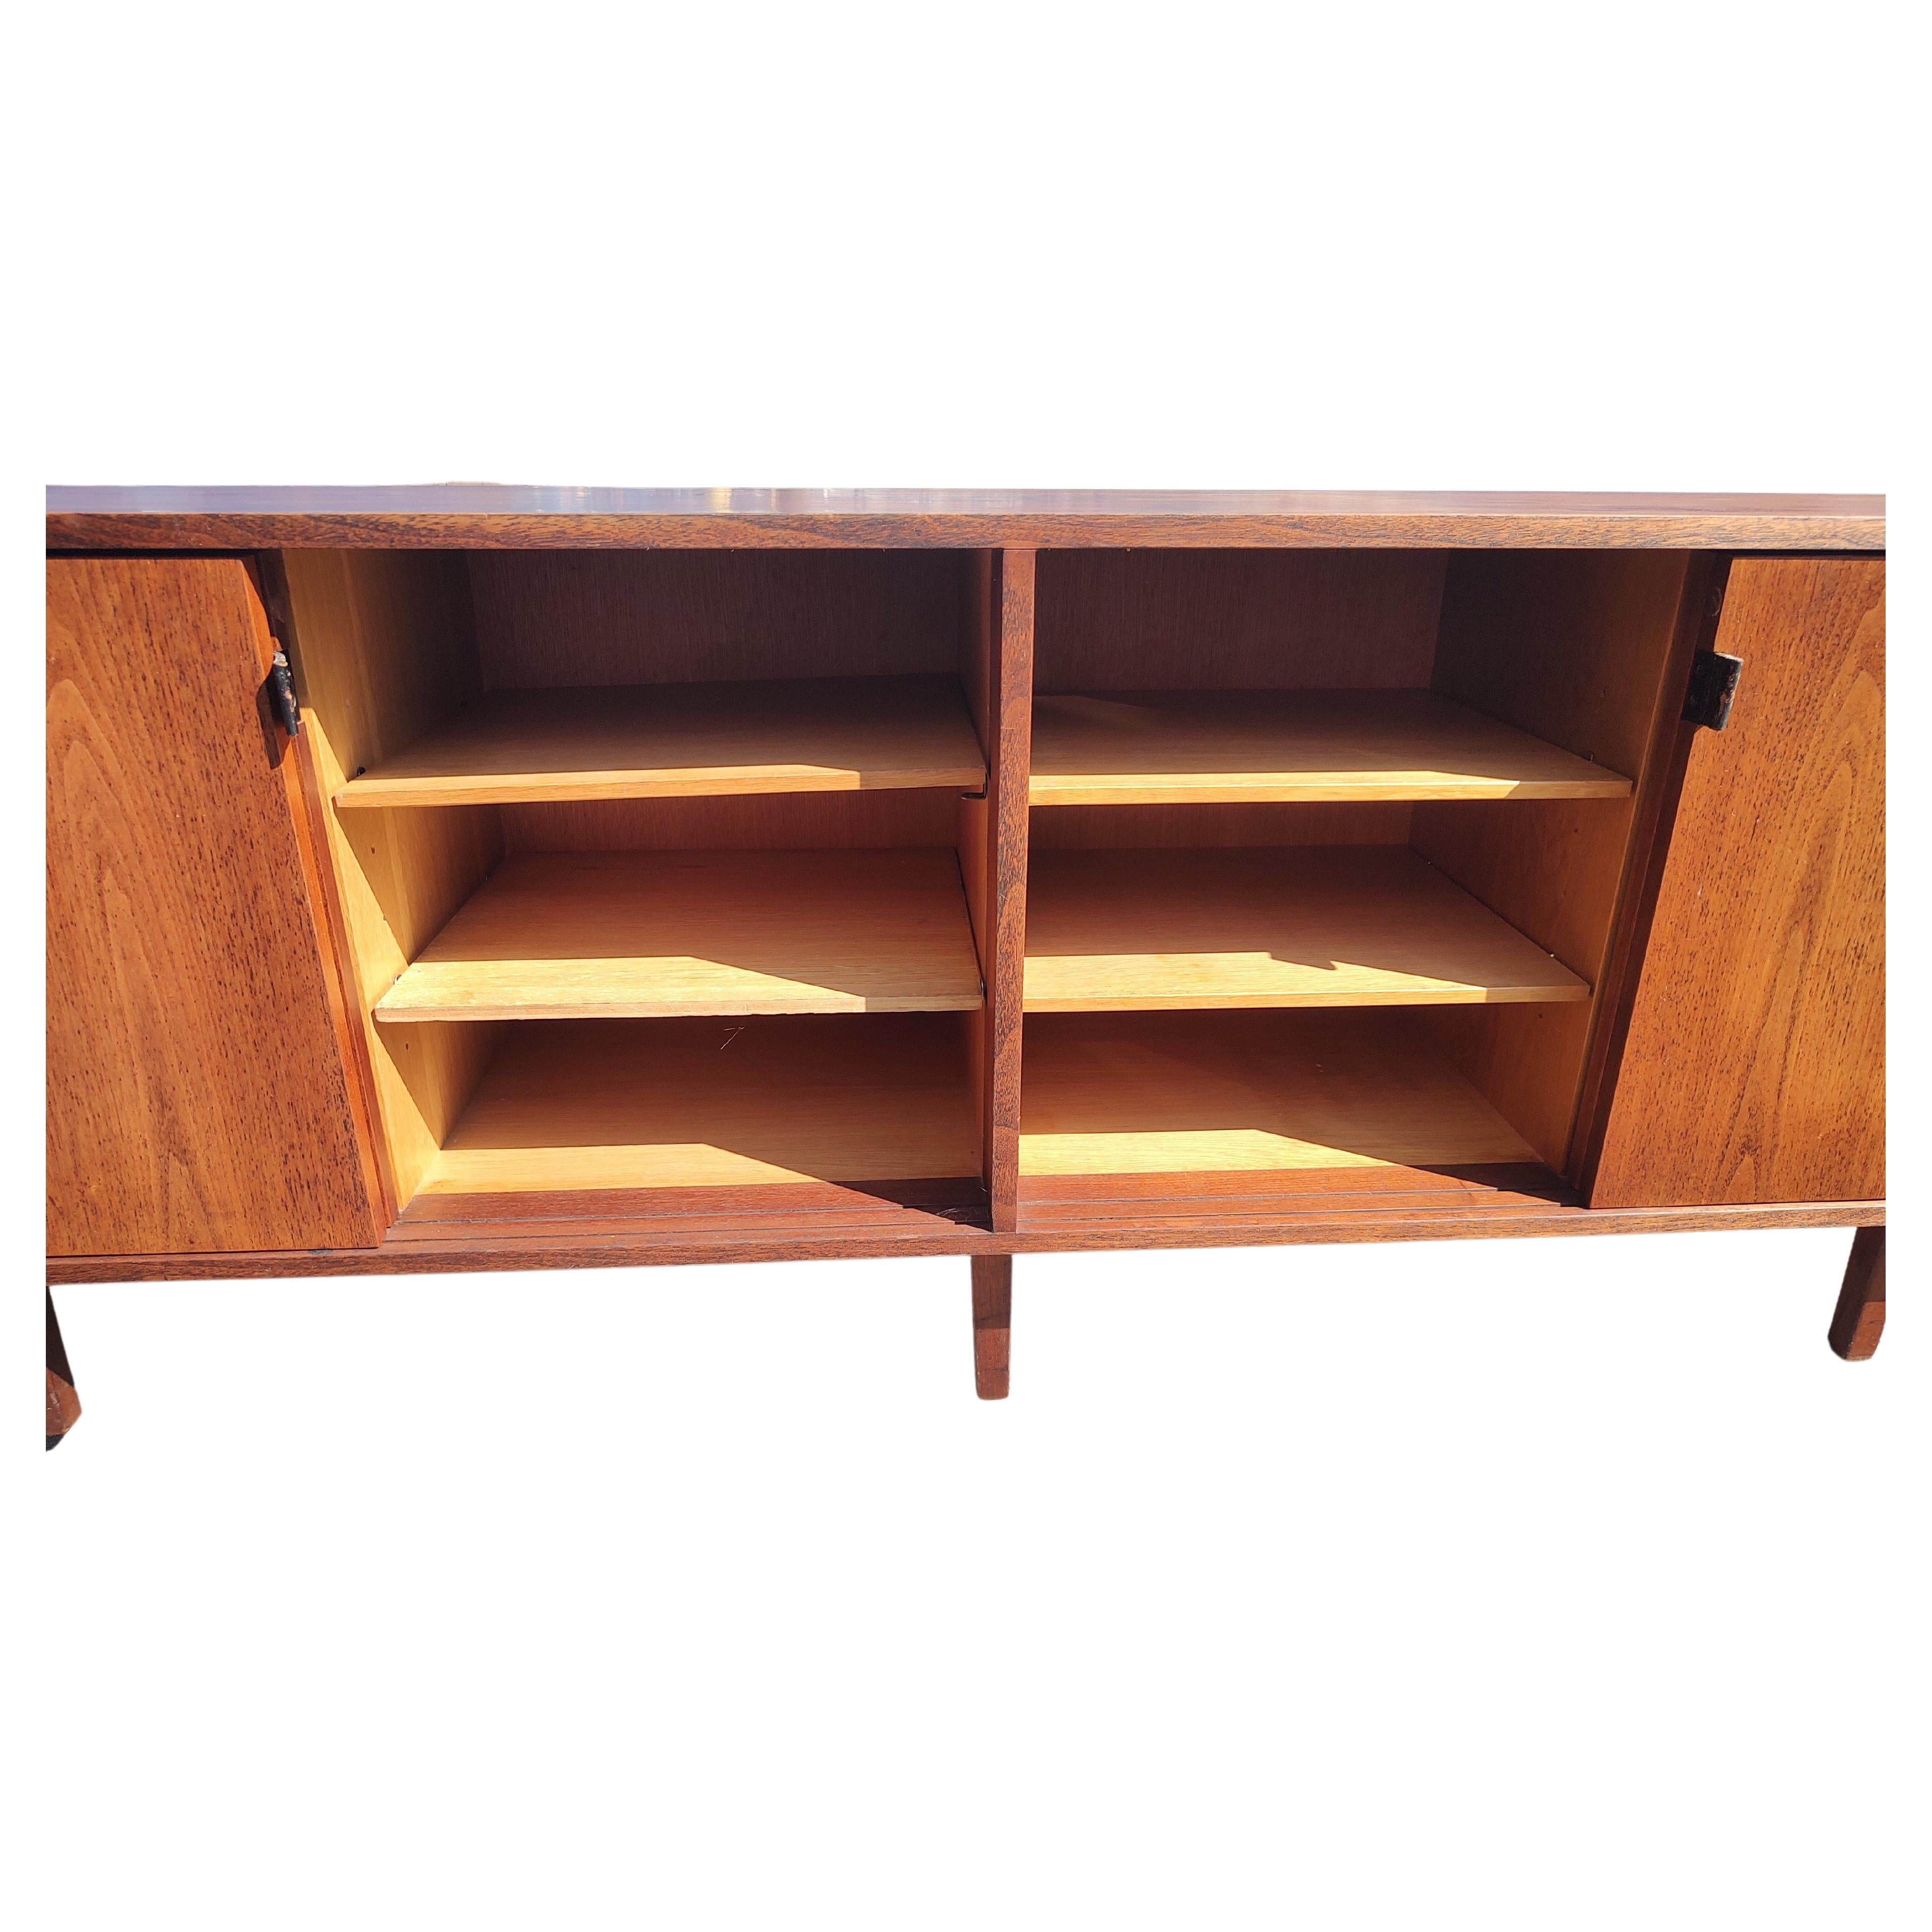 Mid-20th Century Mid Century Modern 4 Door Early Walnut Credenza by Knoll For Sale